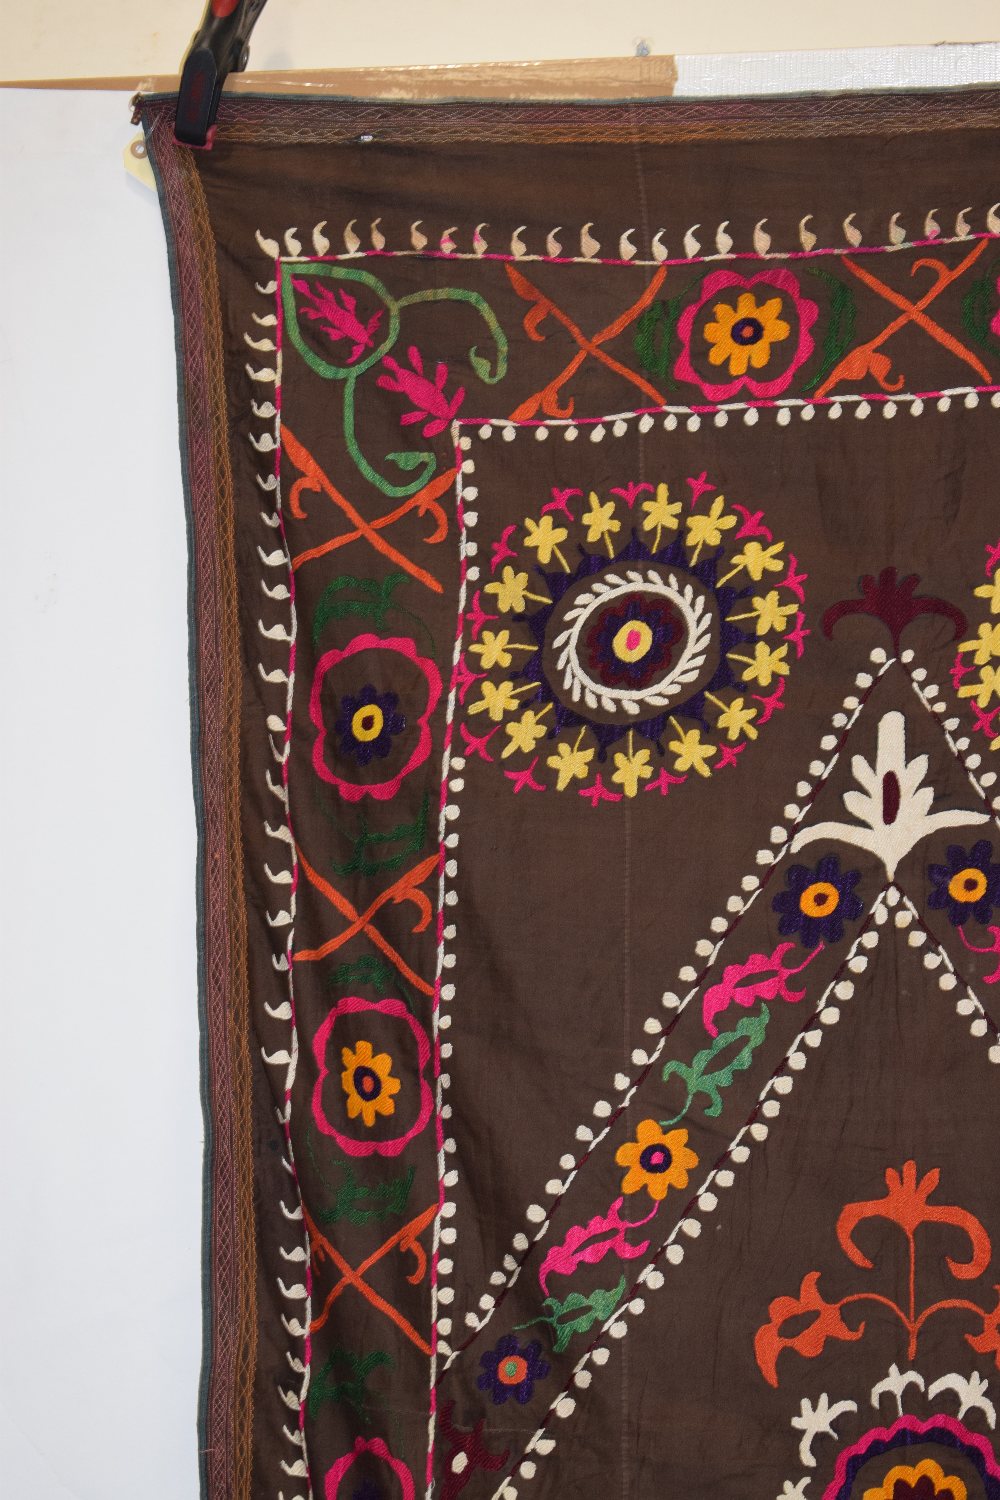 Uzbek suzani joinamoz (prayer cloth), Afghanistan, circa 1960s, 6ft. 3in. X 3ft. 5in. 1.91m. x 1. - Image 4 of 12